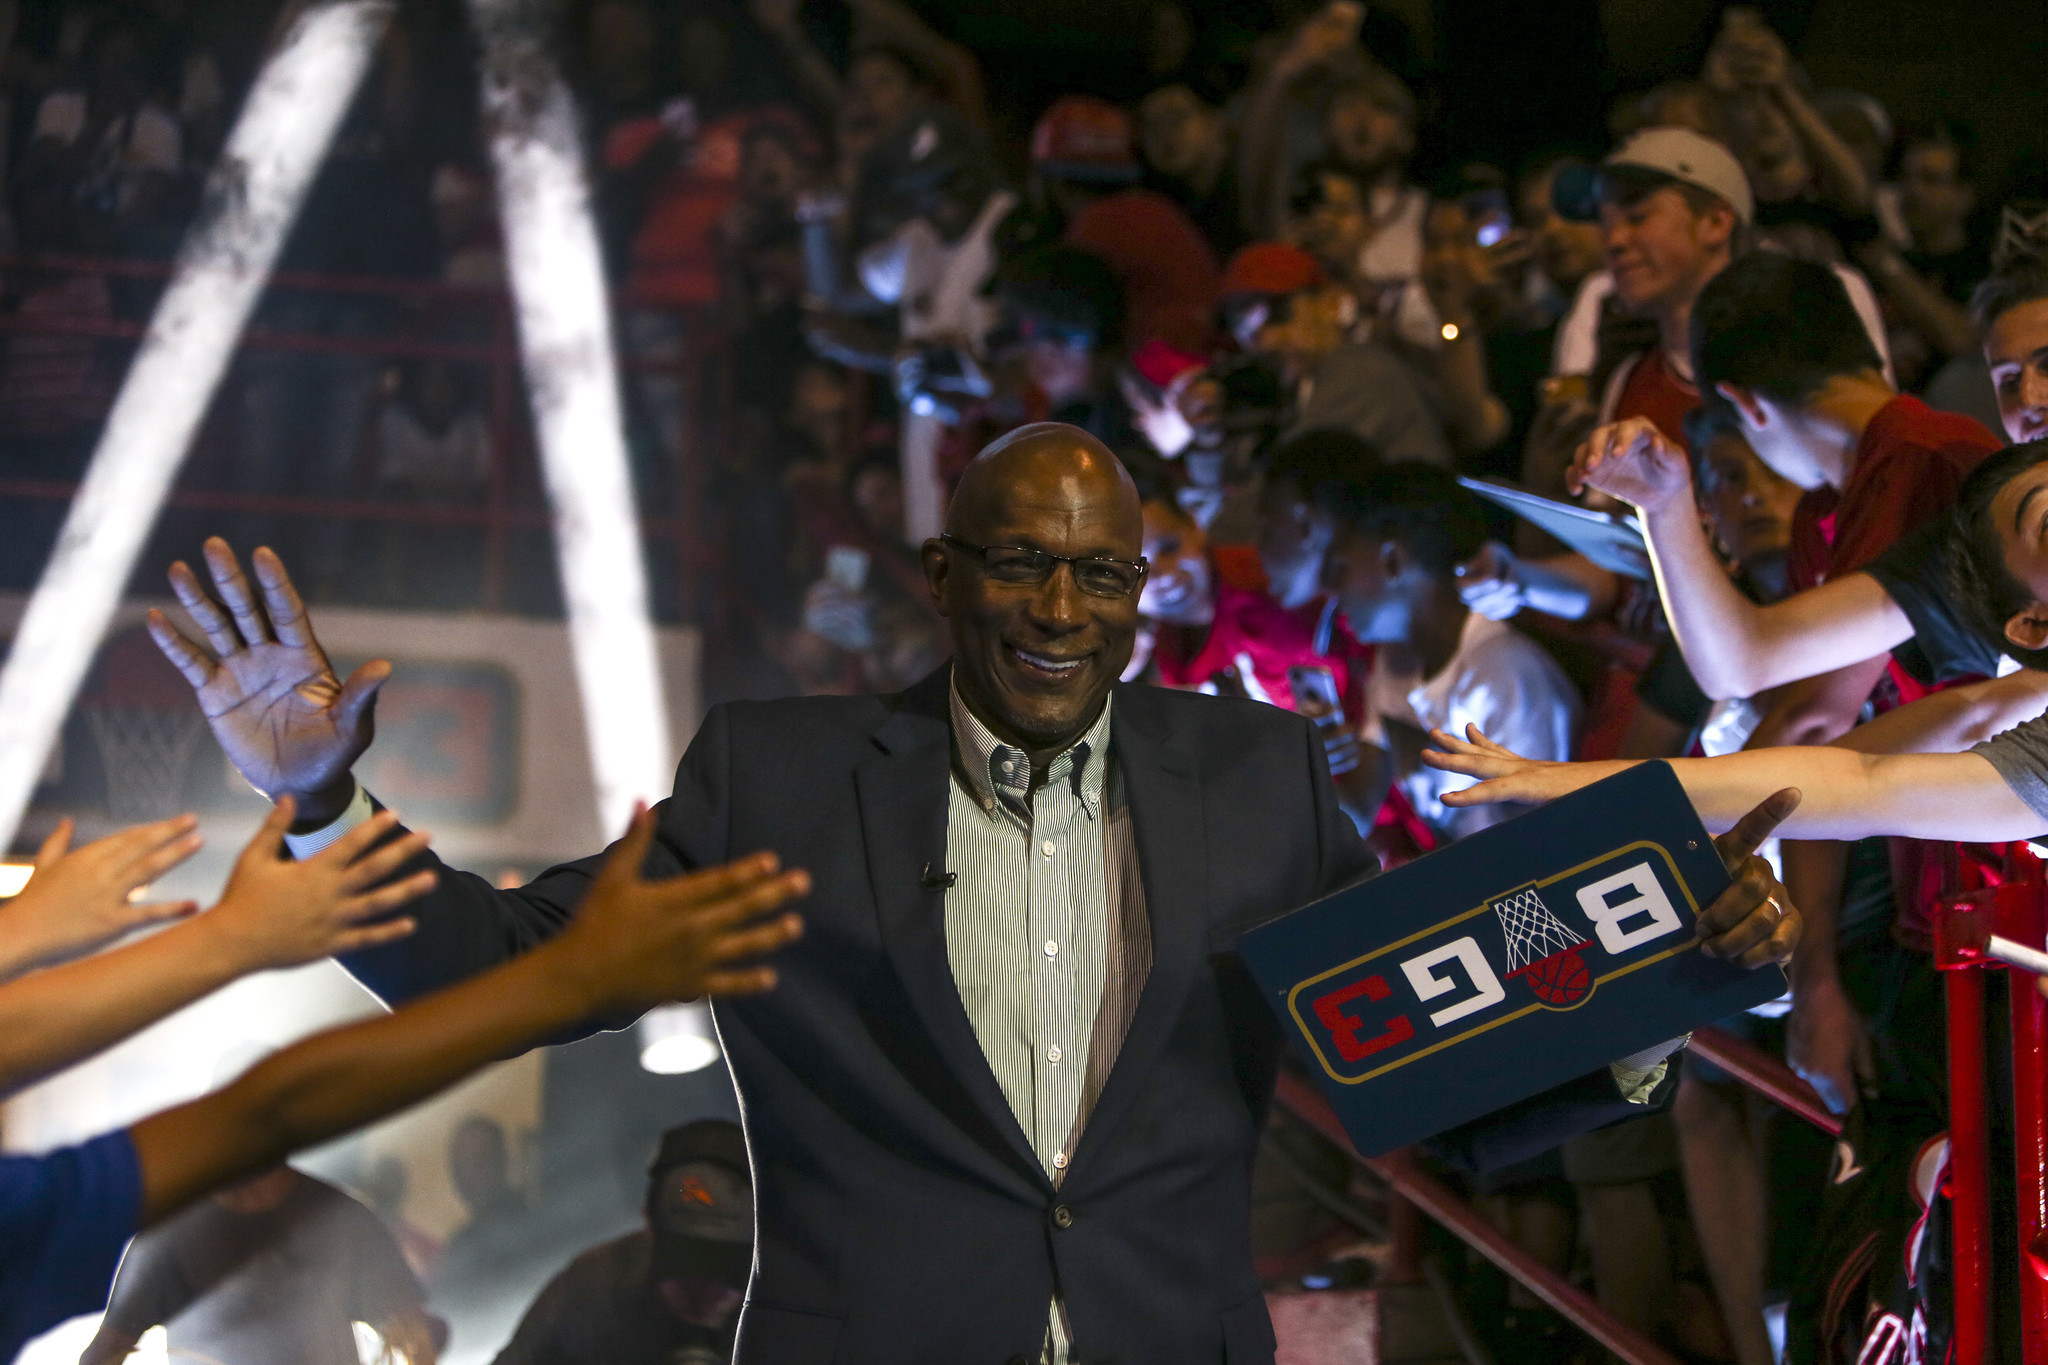 Big3 league stops by Chicago for fun, competitive day of basketball